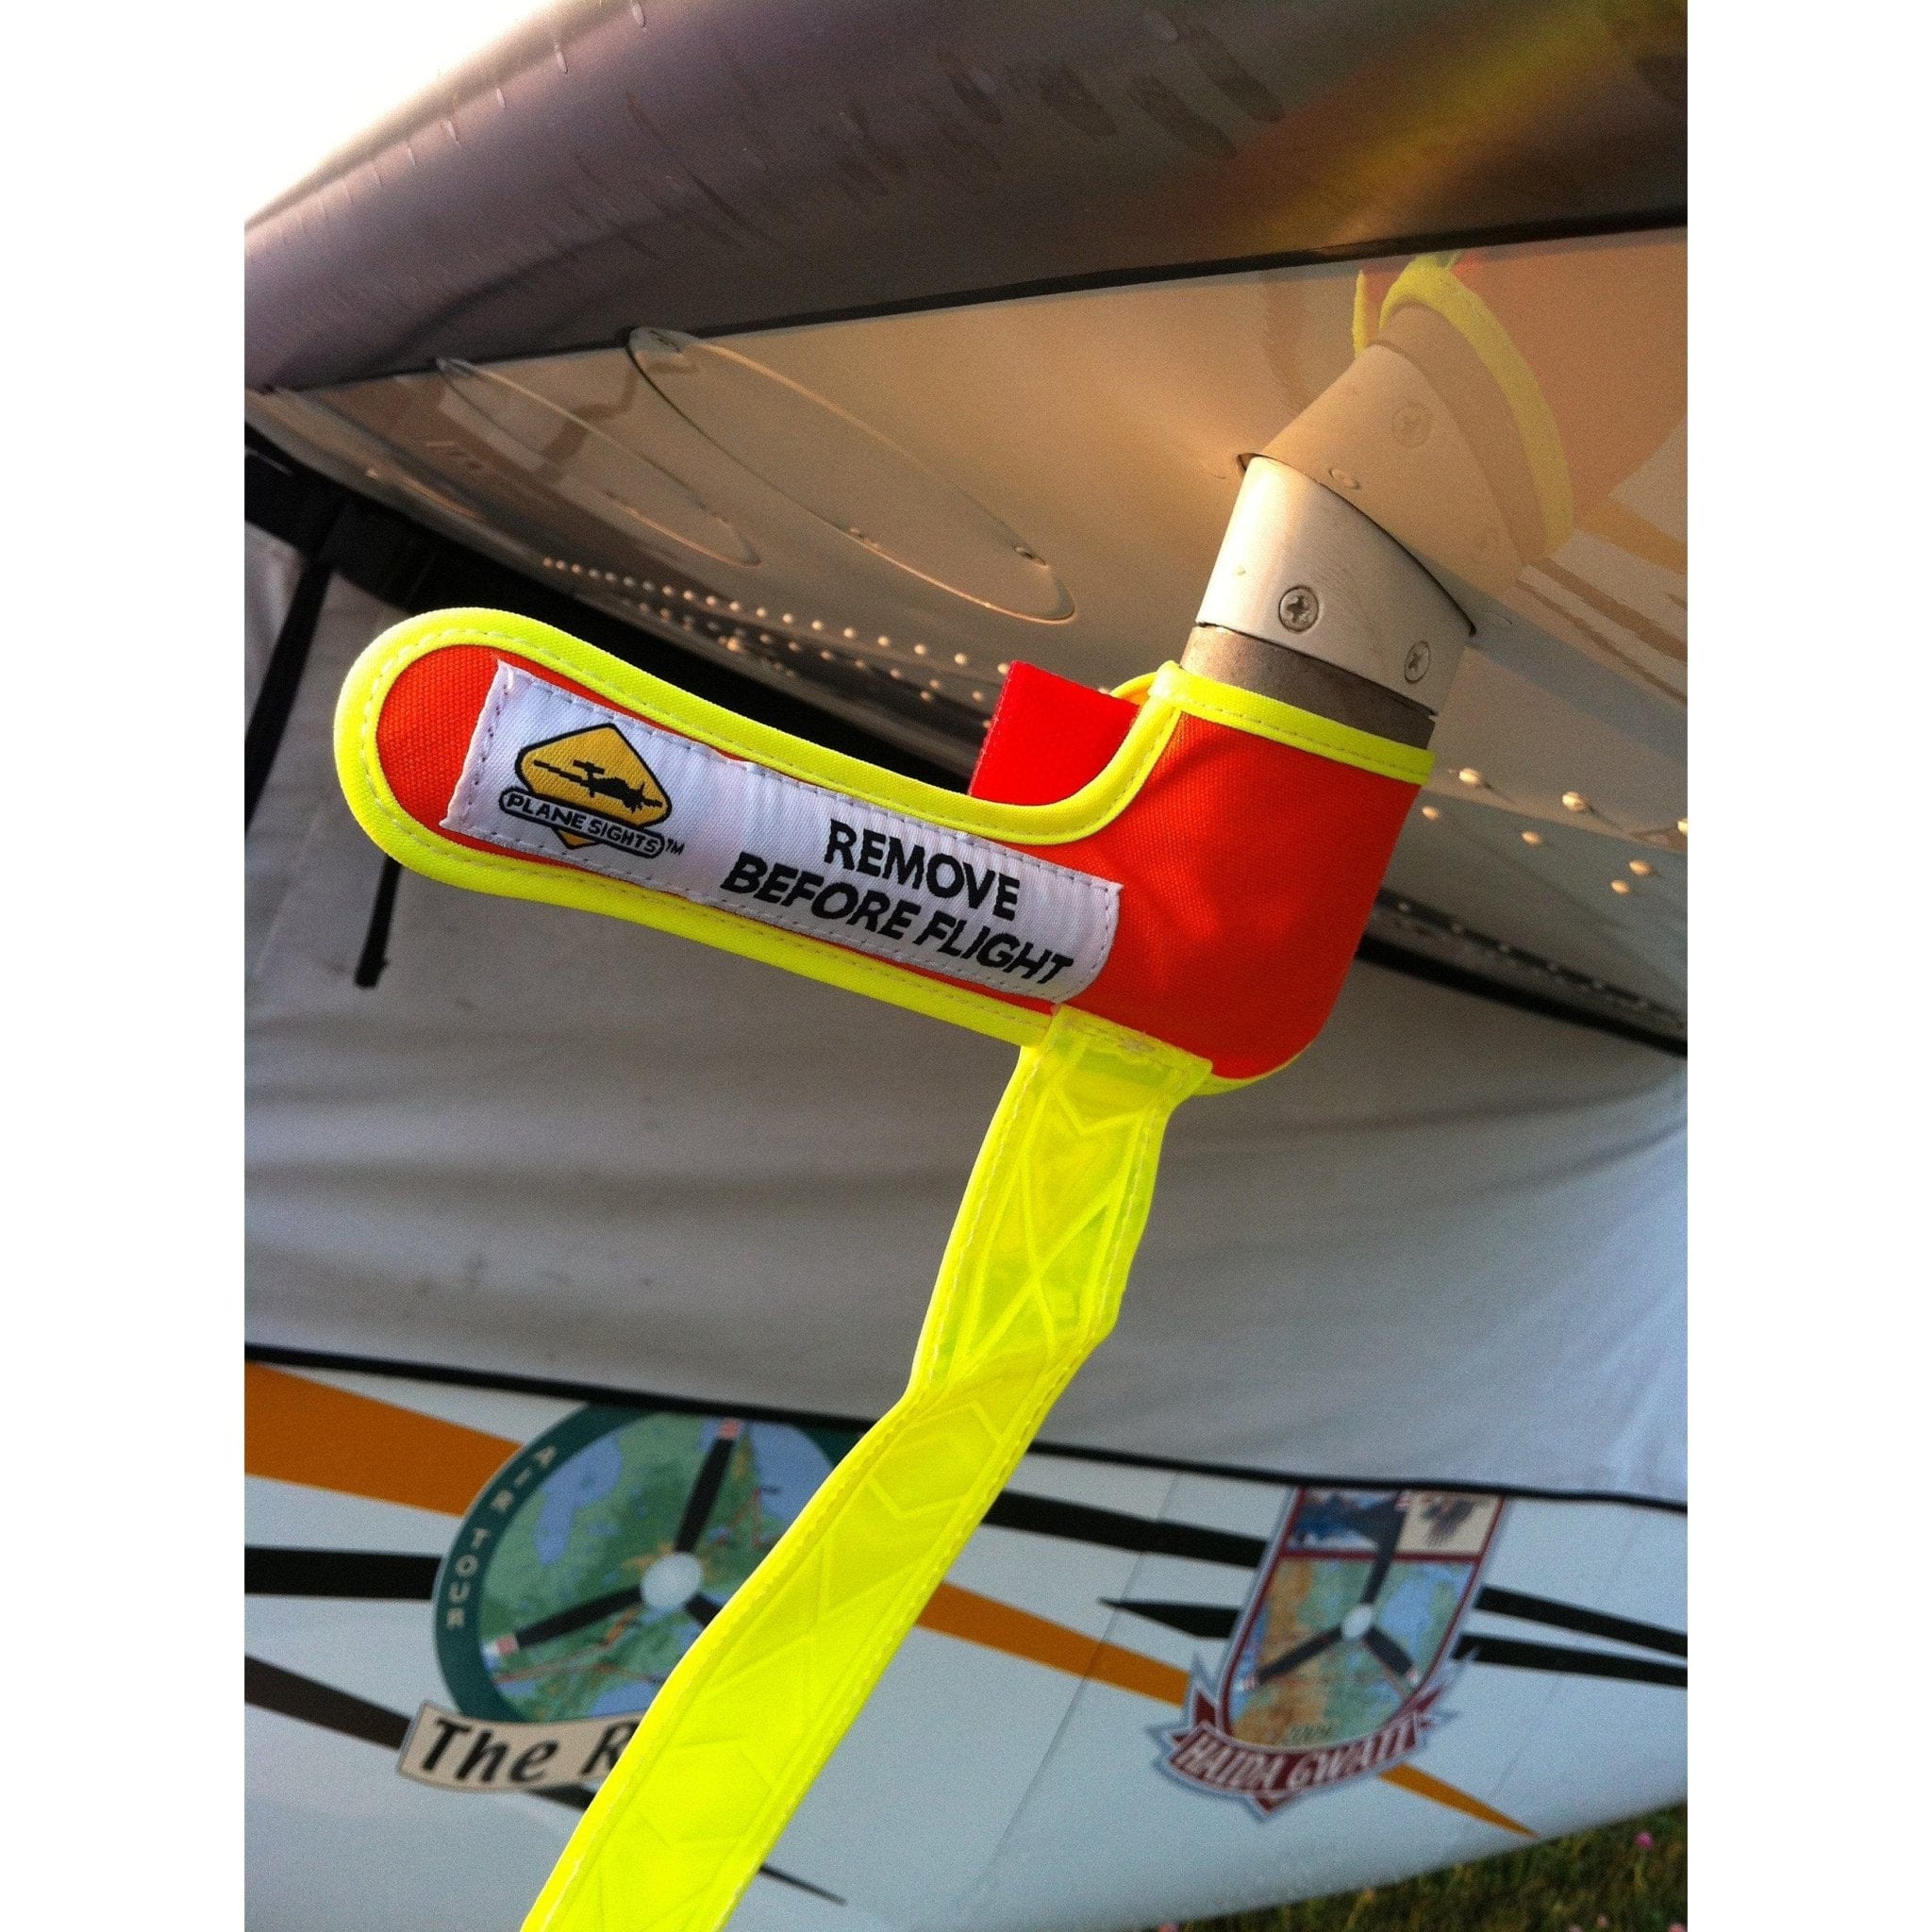 Plane Sights Angled Pitot Tube Cover